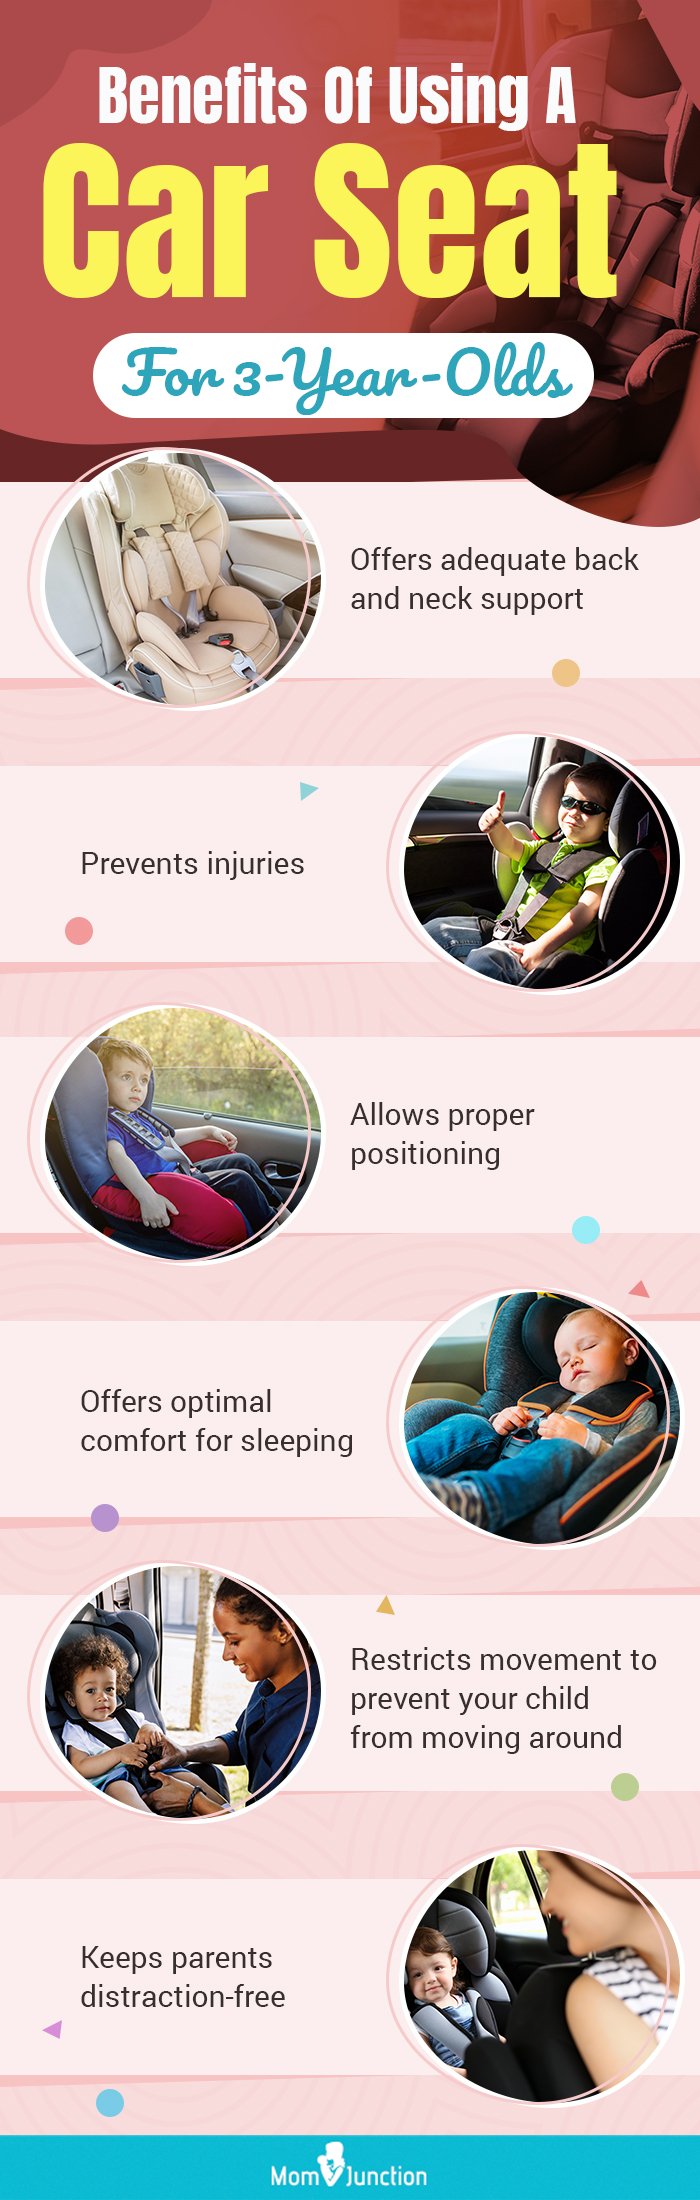 Benefits Of Using A Car Seat For 3 Year Olds (infographic)